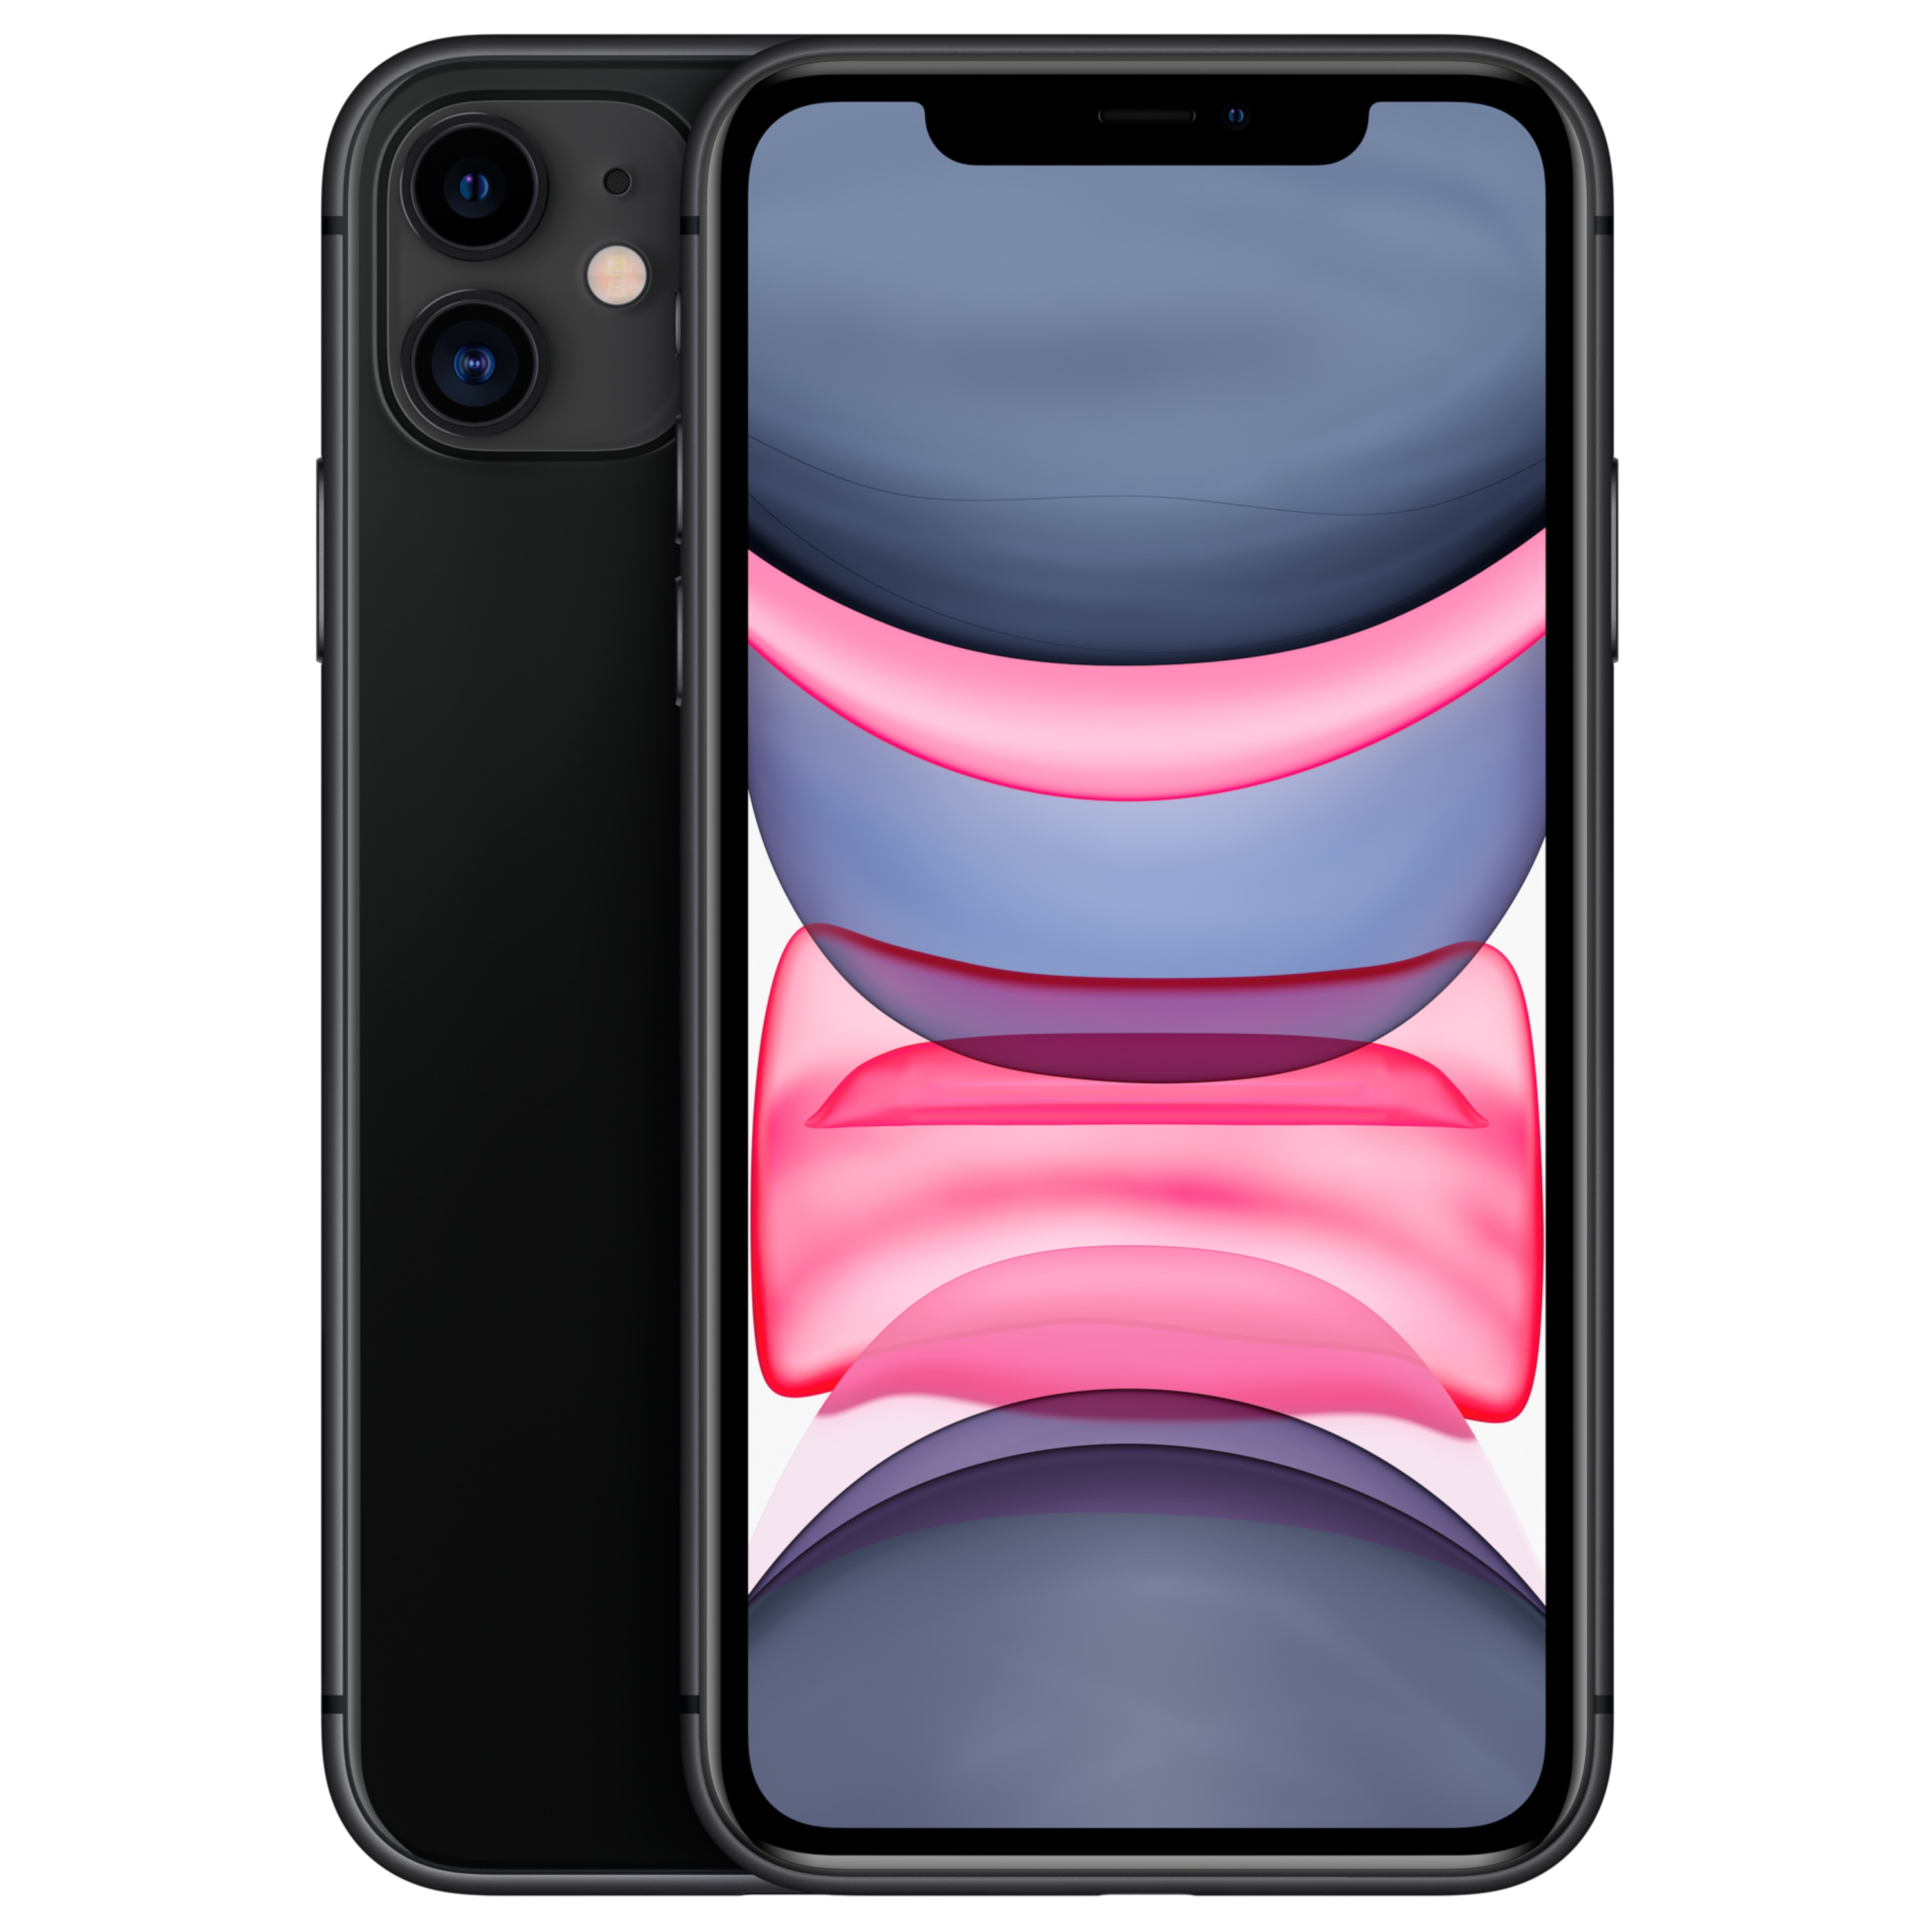 APPLE iPhone 11, 15,5 cm (6,1") LCD Multi-Touch Display, iOS 13, 128 GB Speicher, 4 GB Arbeitsspeicher, A13 Bionic Chip, Bluetooth® 5.0, Face ID